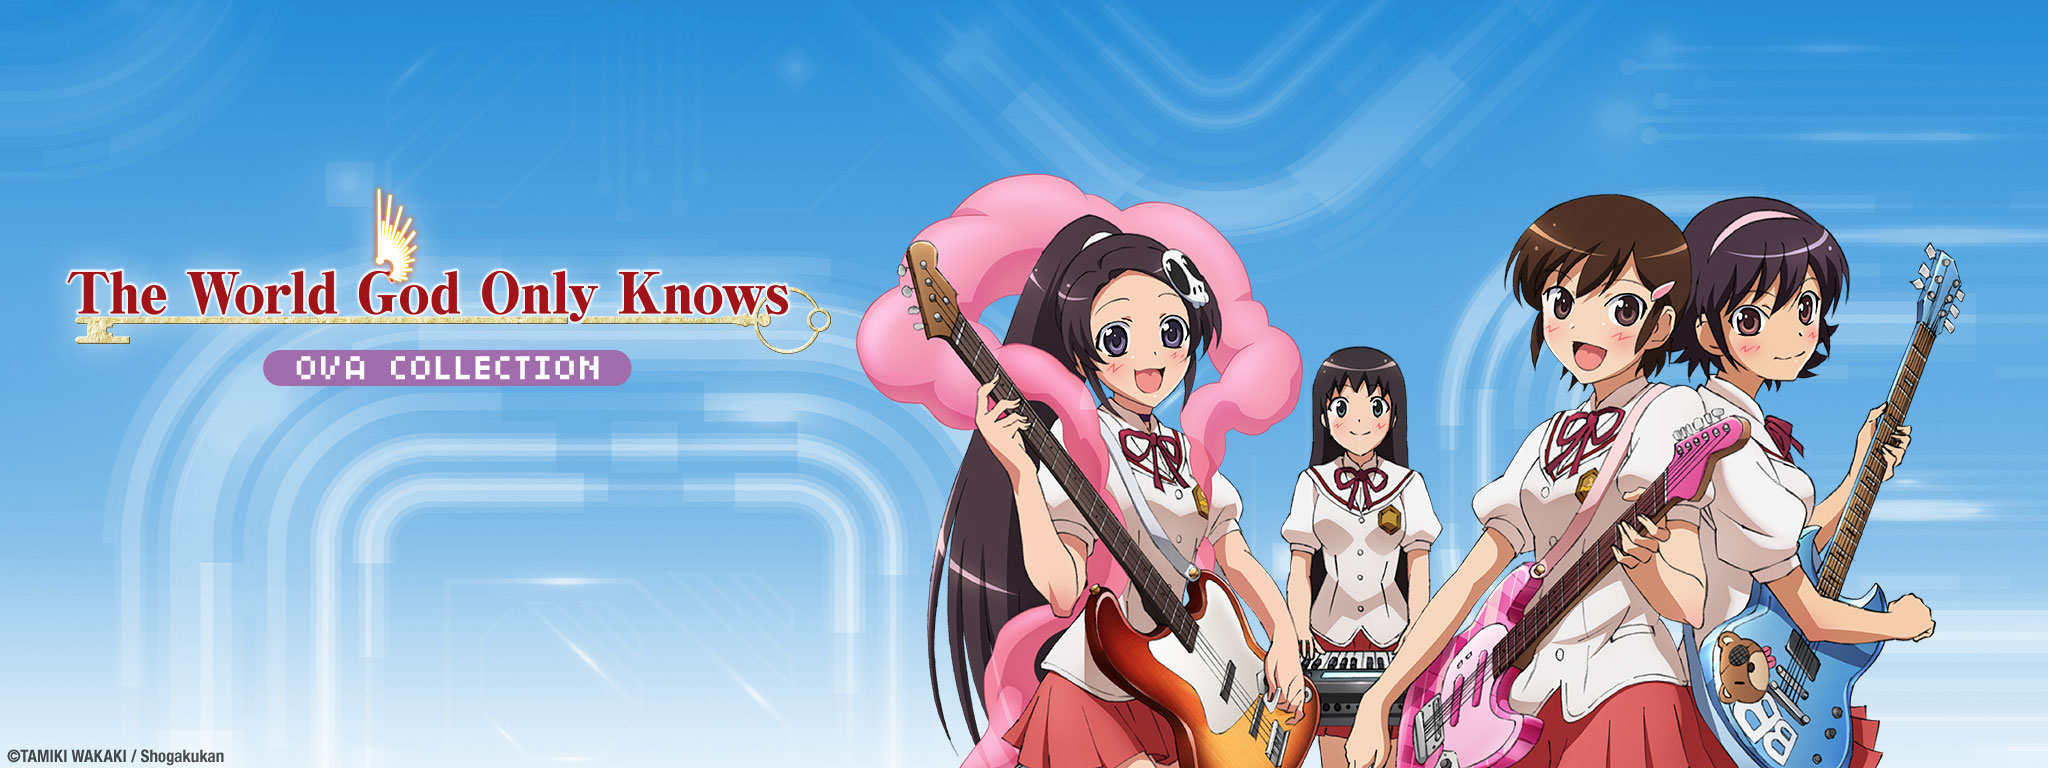 Title Art for The World God Only Knows OVA